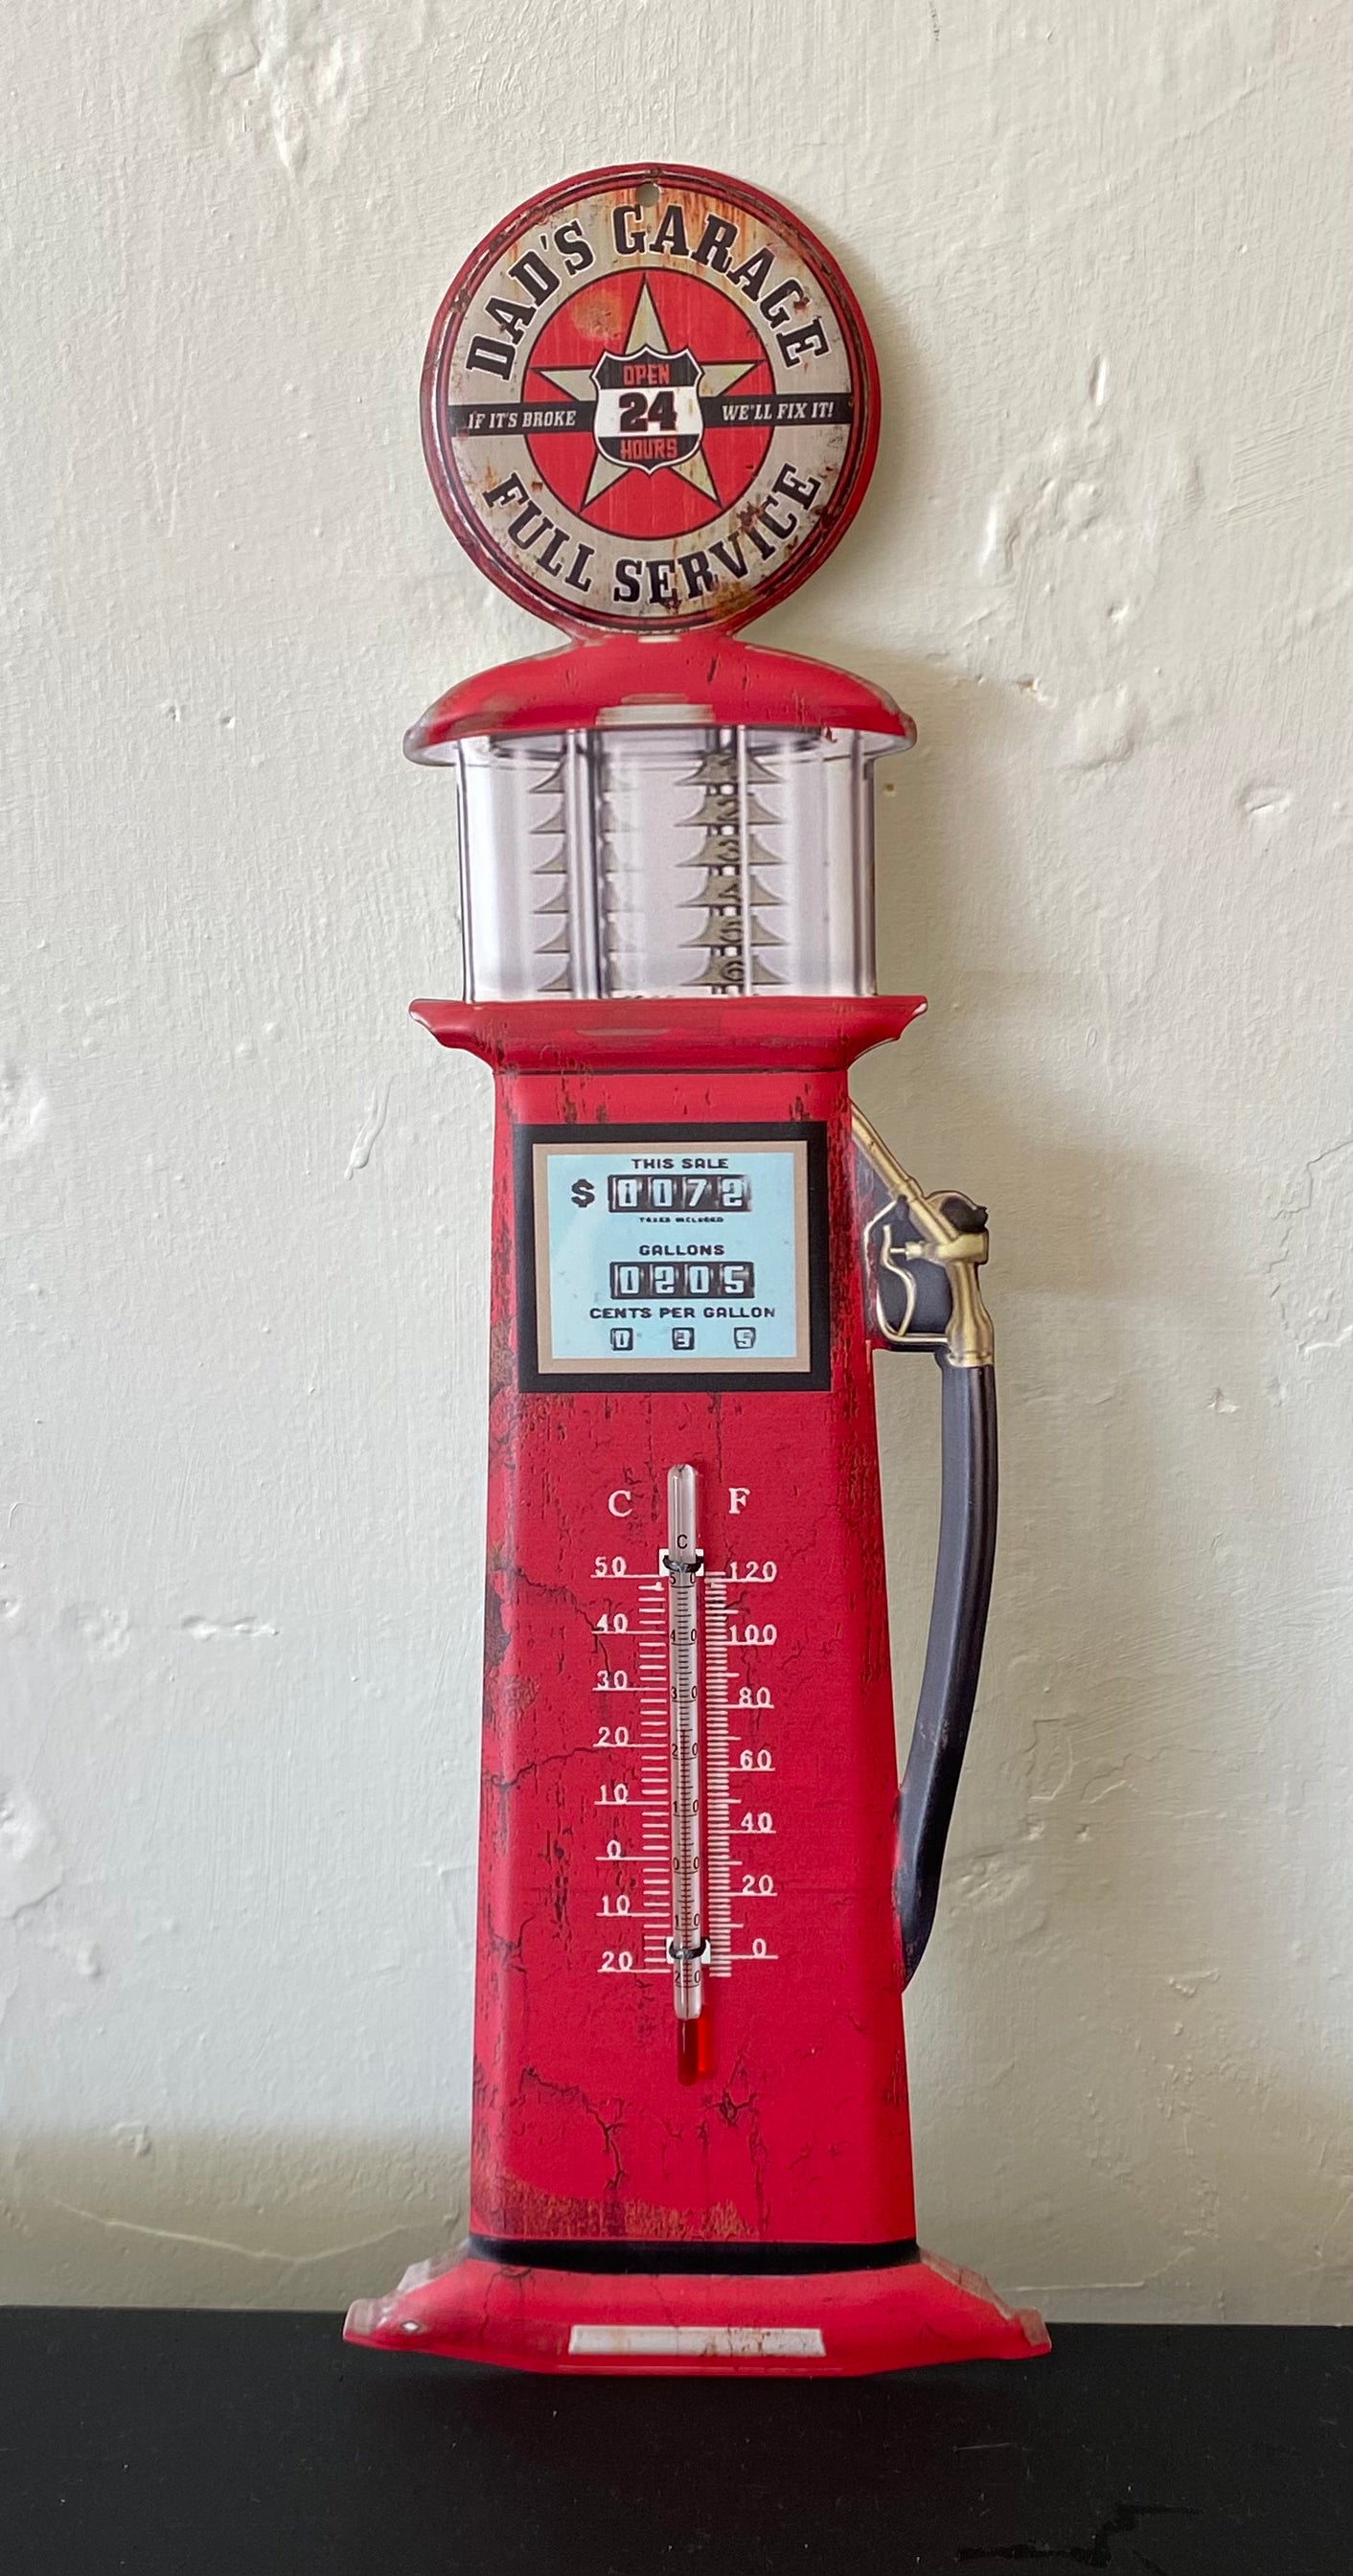 Thermometer (Dads Garage)